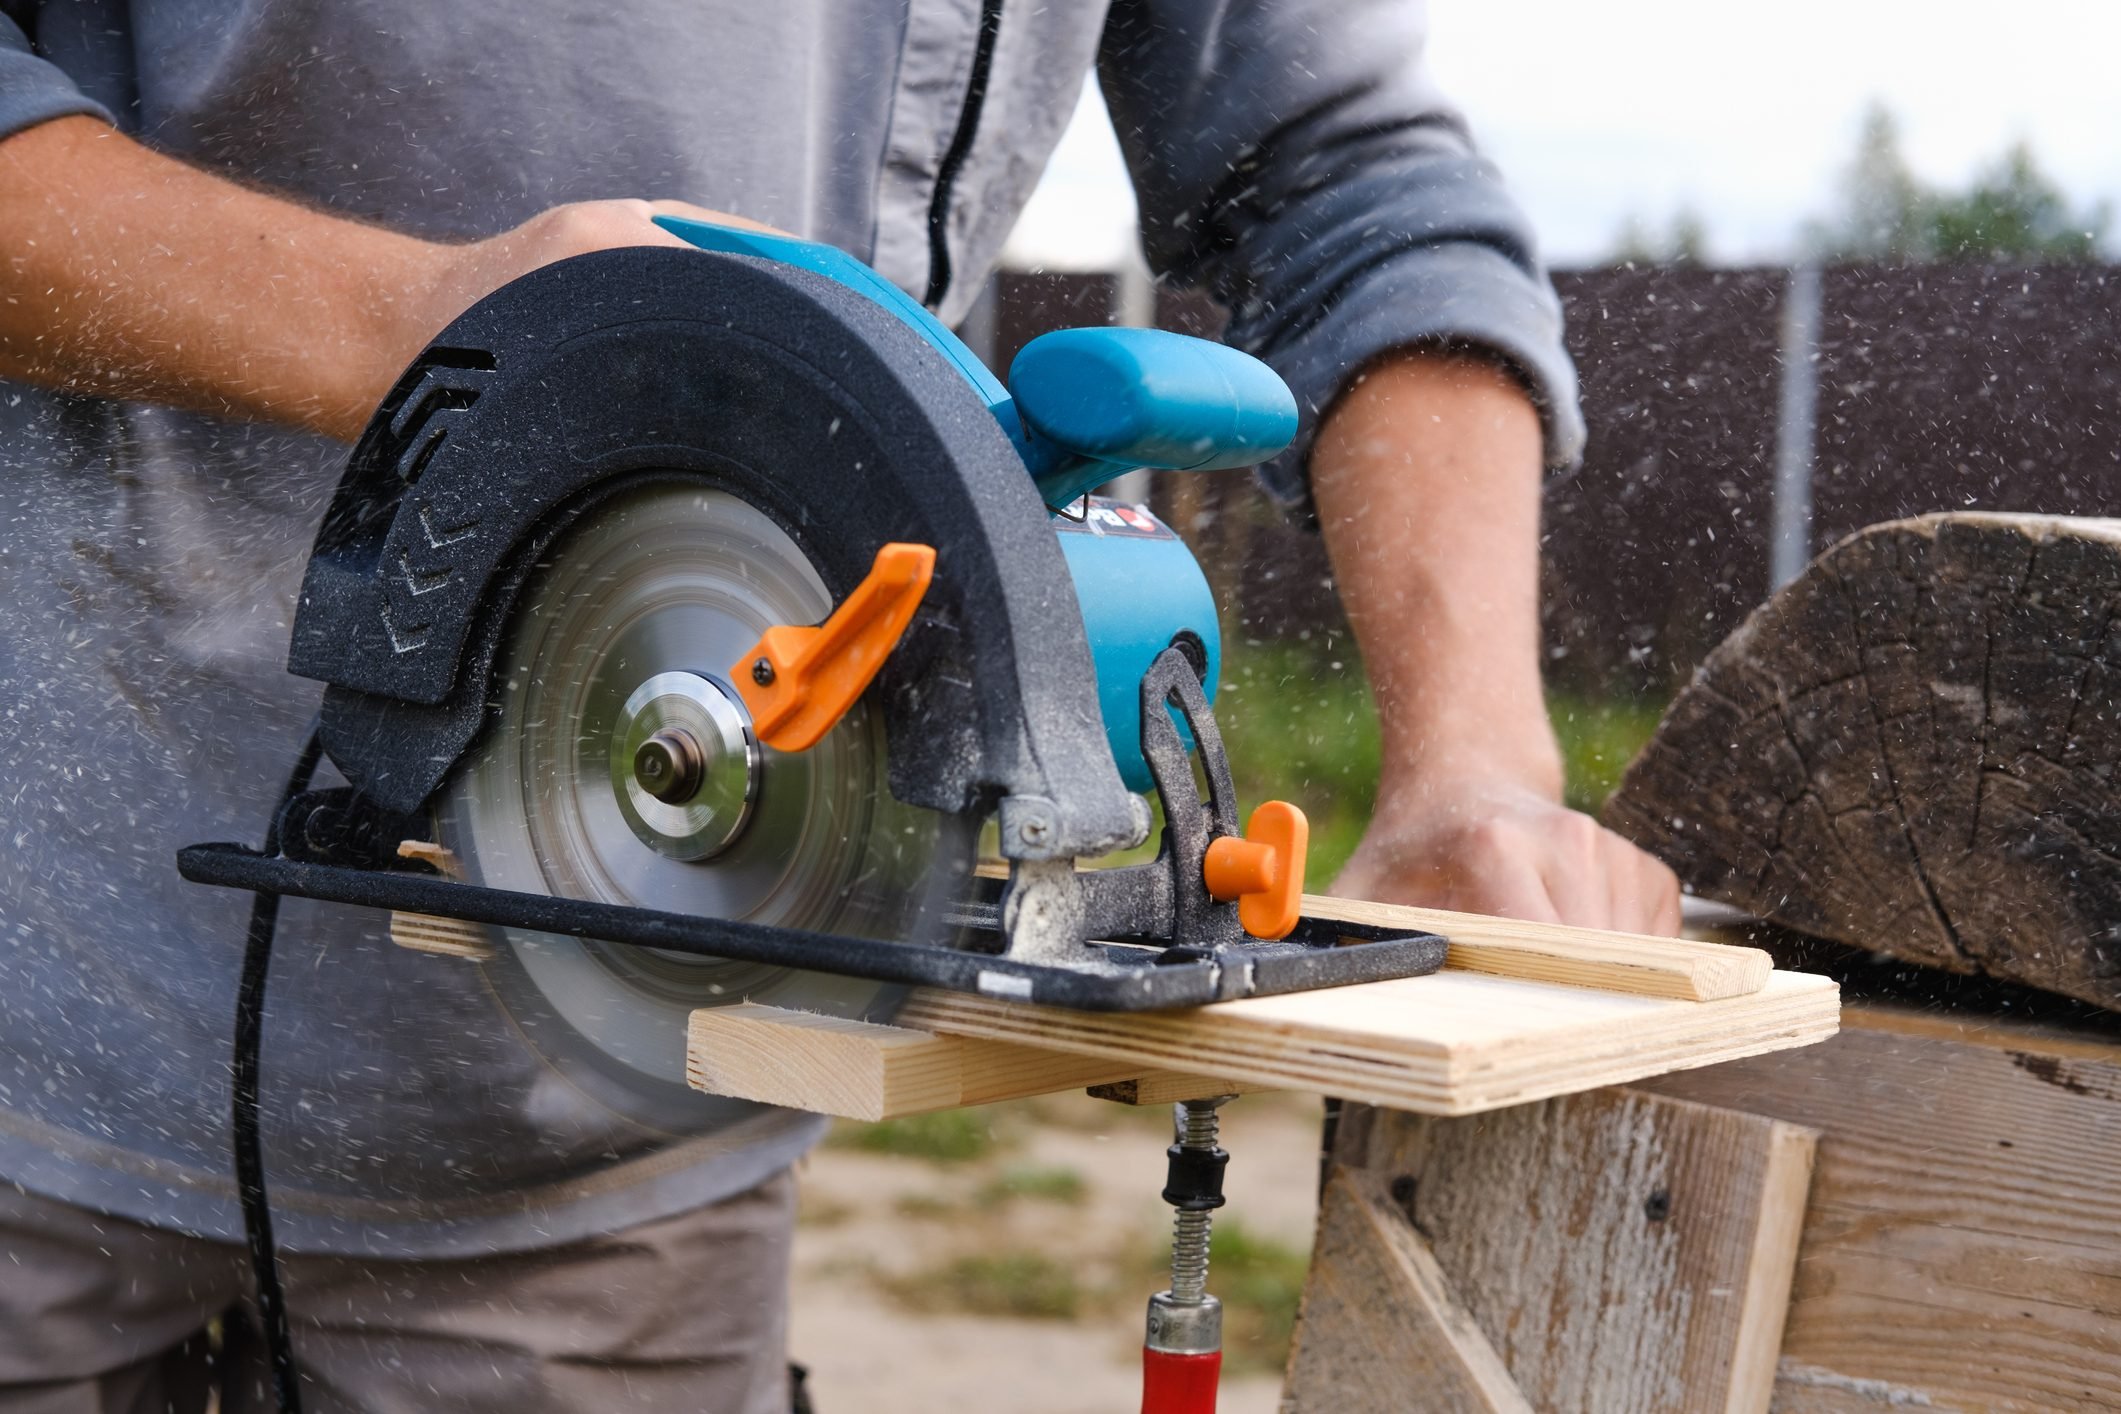 Buyer's Guide To Circular Saws